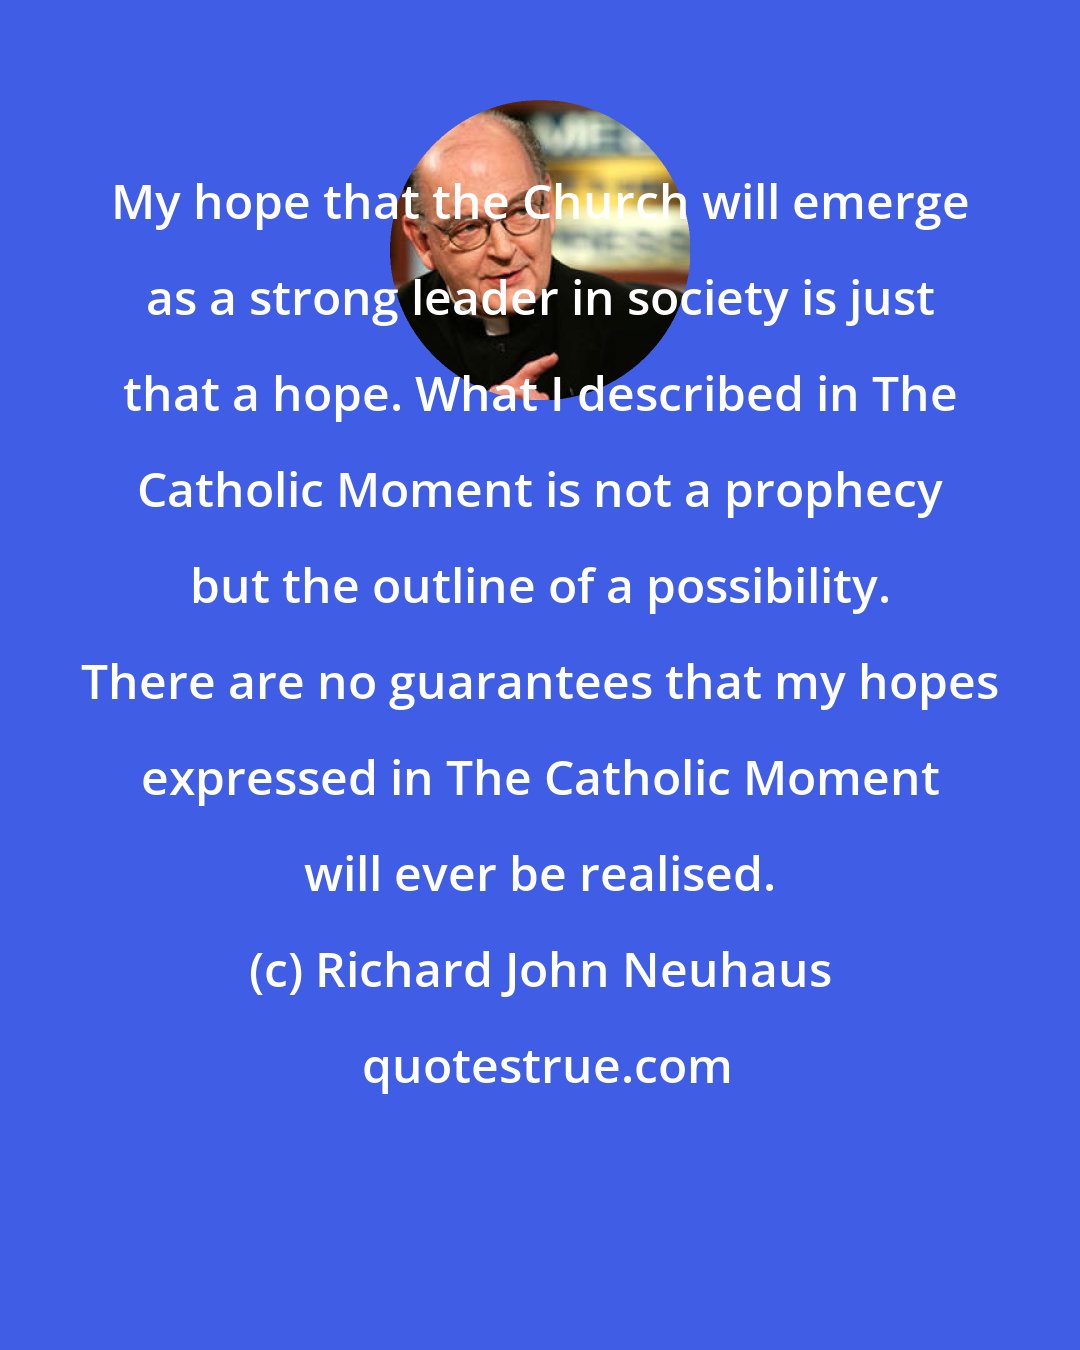 Richard John Neuhaus: My hope that the Church will emerge as a strong leader in society is just that a hope. What I described in The Catholic Moment is not a prophecy but the outline of a possibility. There are no guarantees that my hopes expressed in The Catholic Moment will ever be realised.